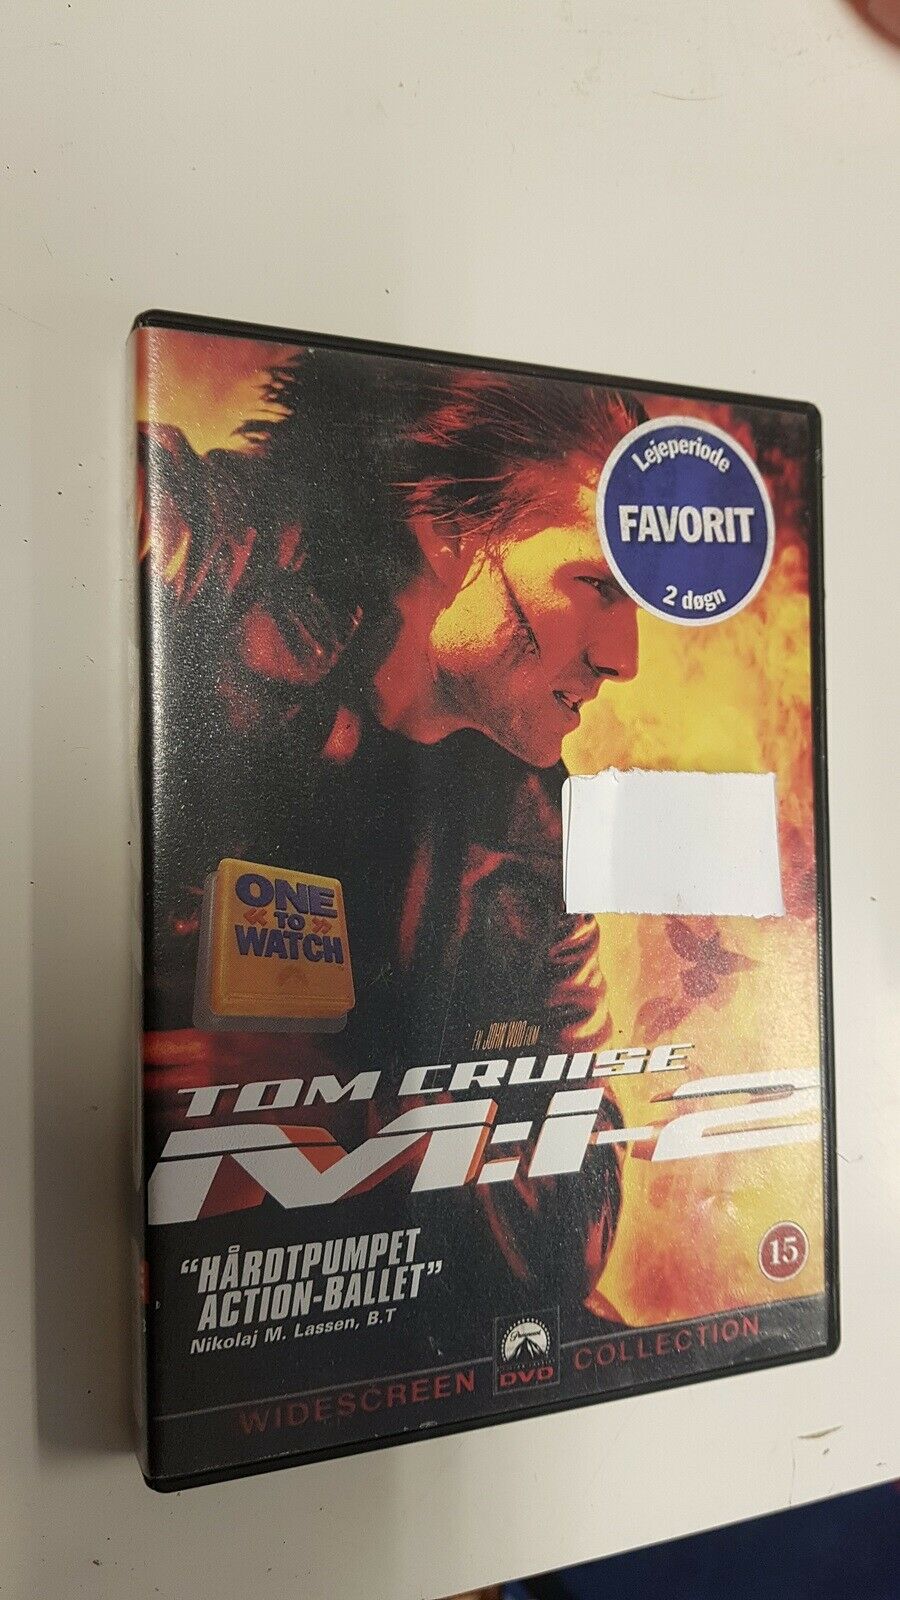 Mission Impossible-2, DVD, action